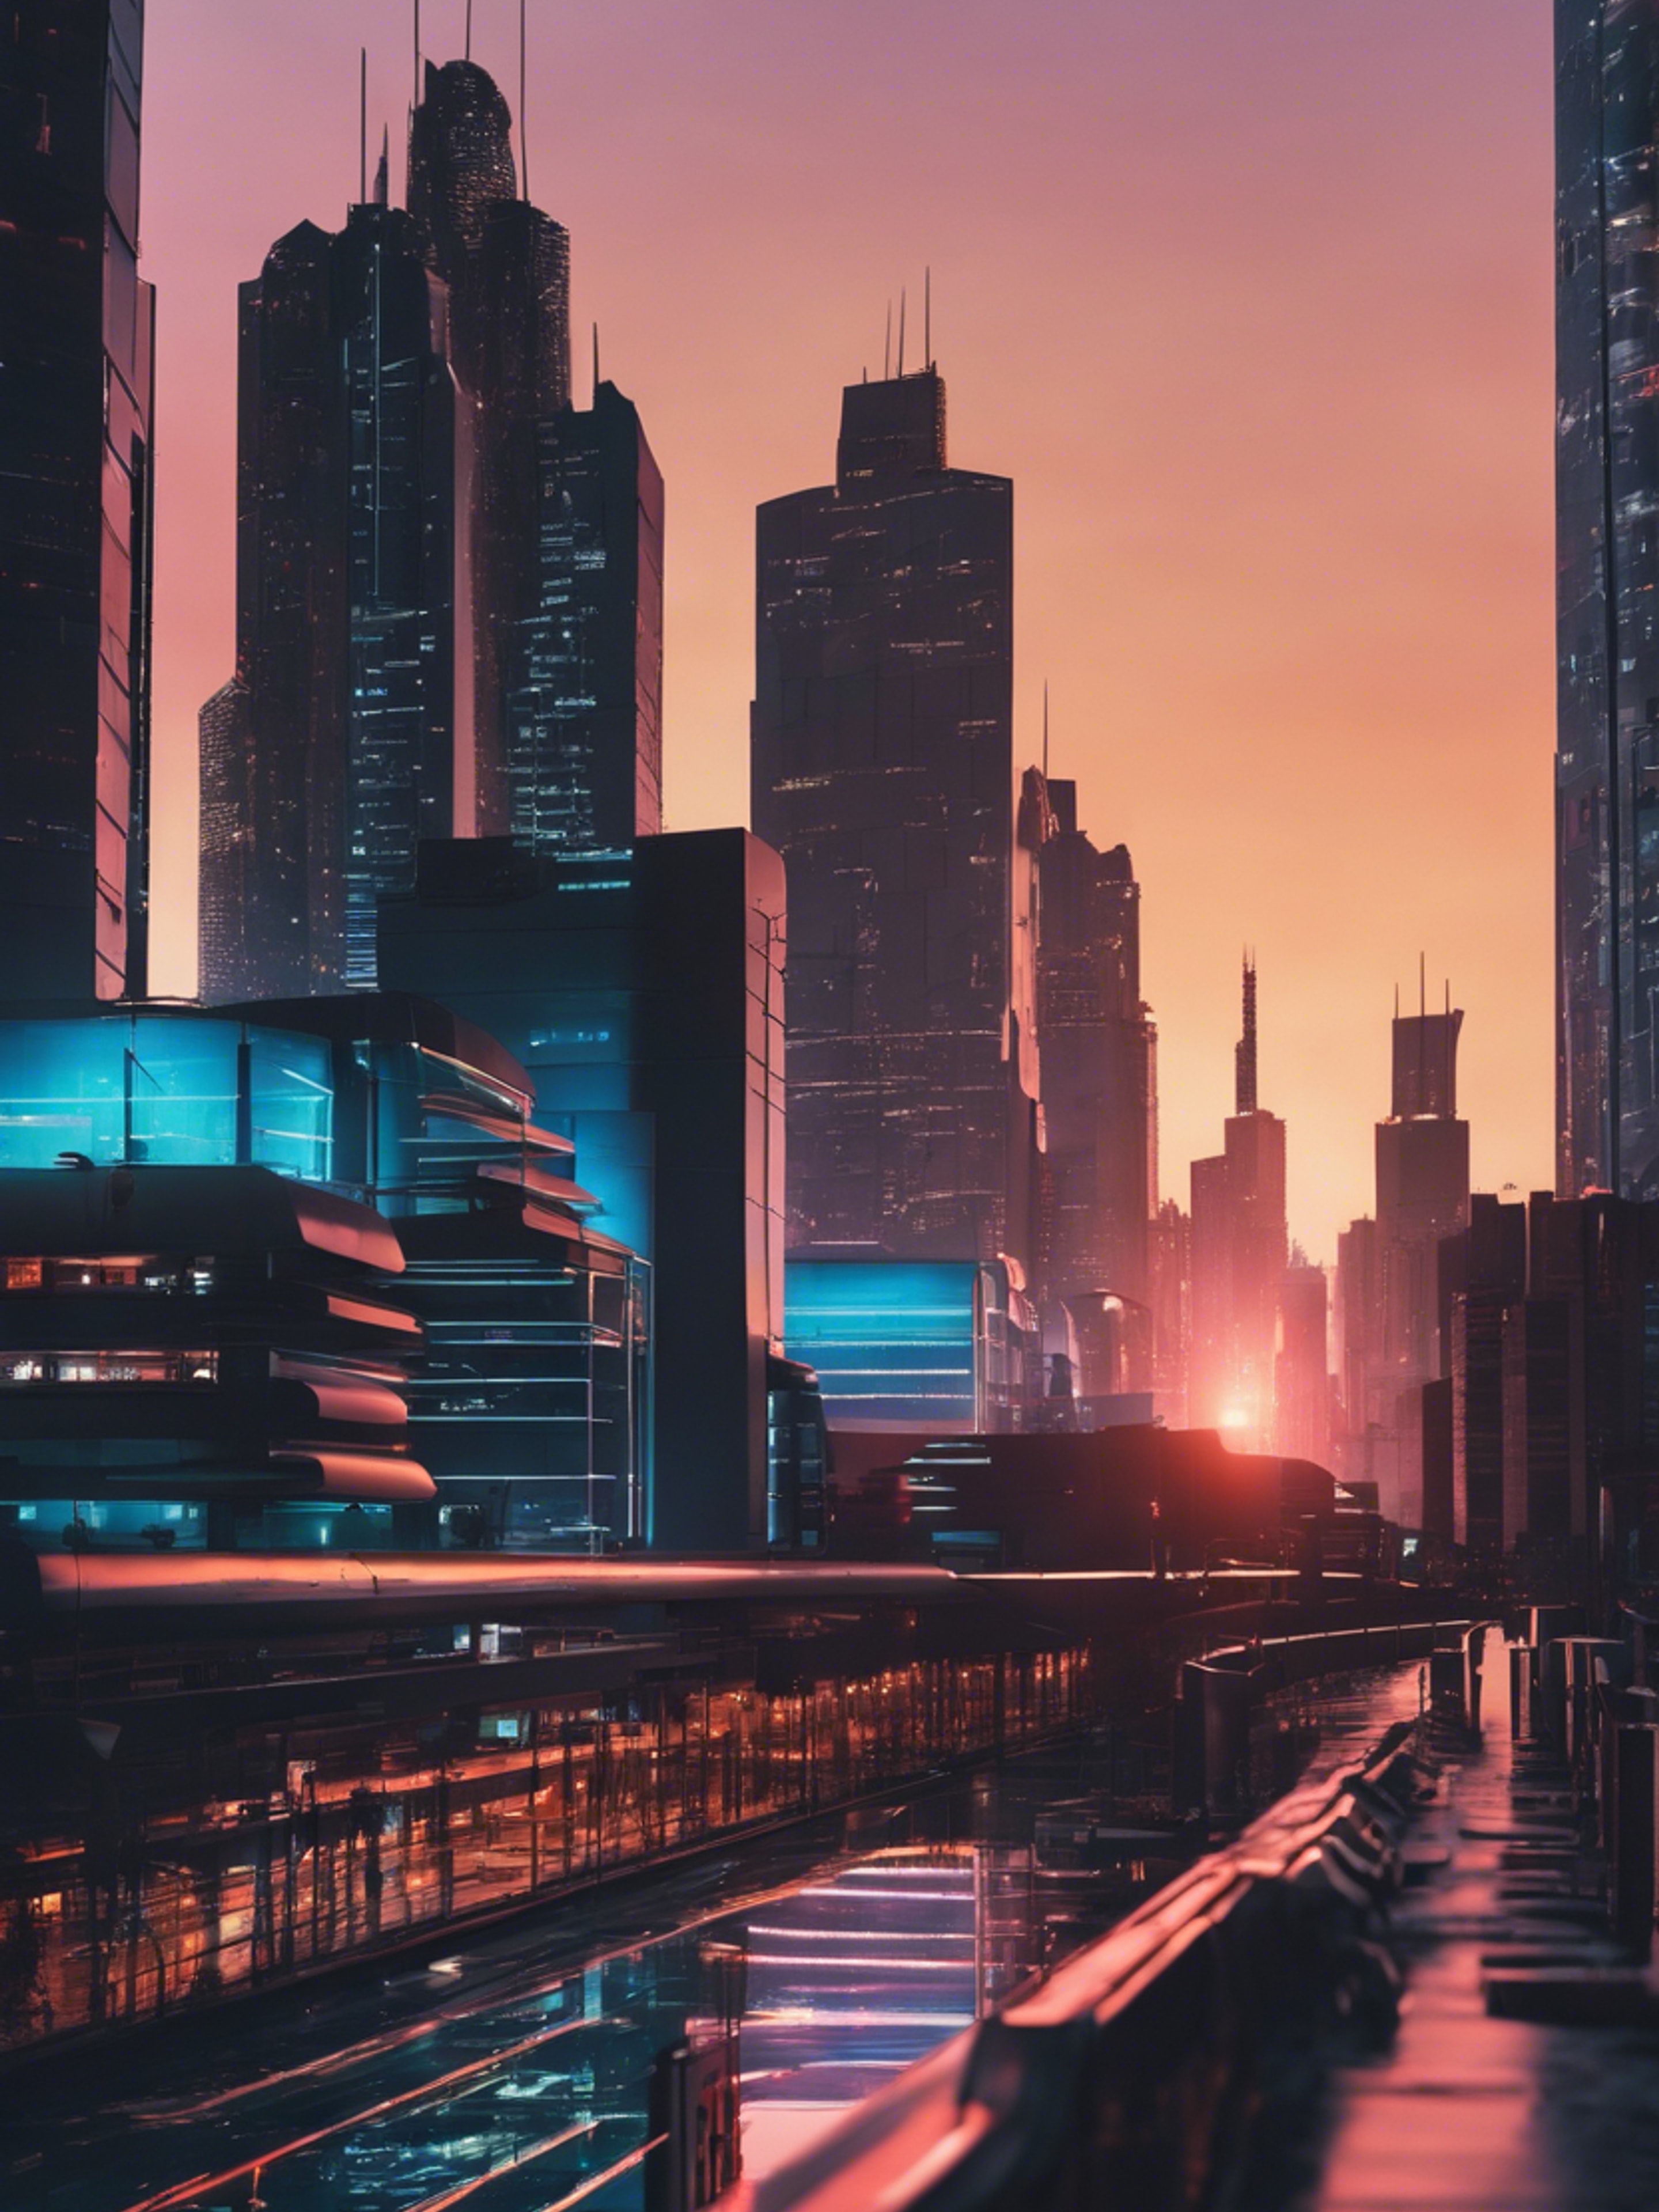 A sleek, futuristic cityscape at sunset, with buildings made of reflective black glass, sparking with cool neon lights. Tapet[602b1b36f4744978842c]